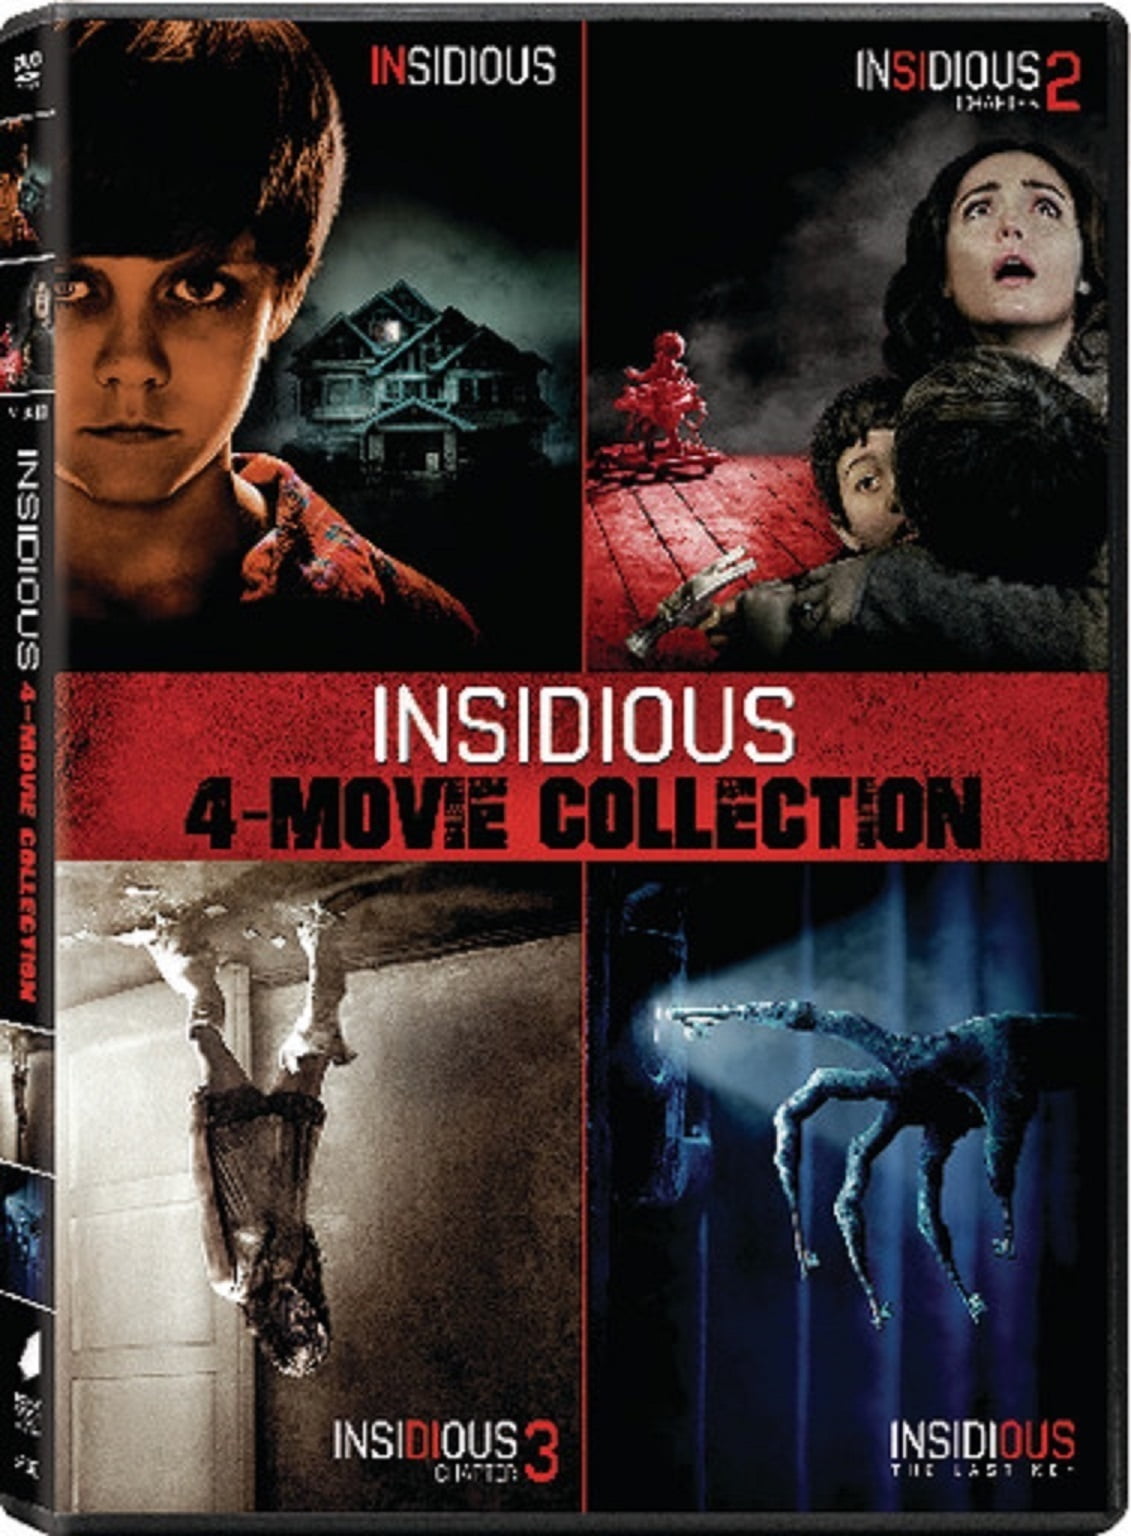 Insidious: 4-Movie Collection (DVD Sony Pictures) - Walmart.com